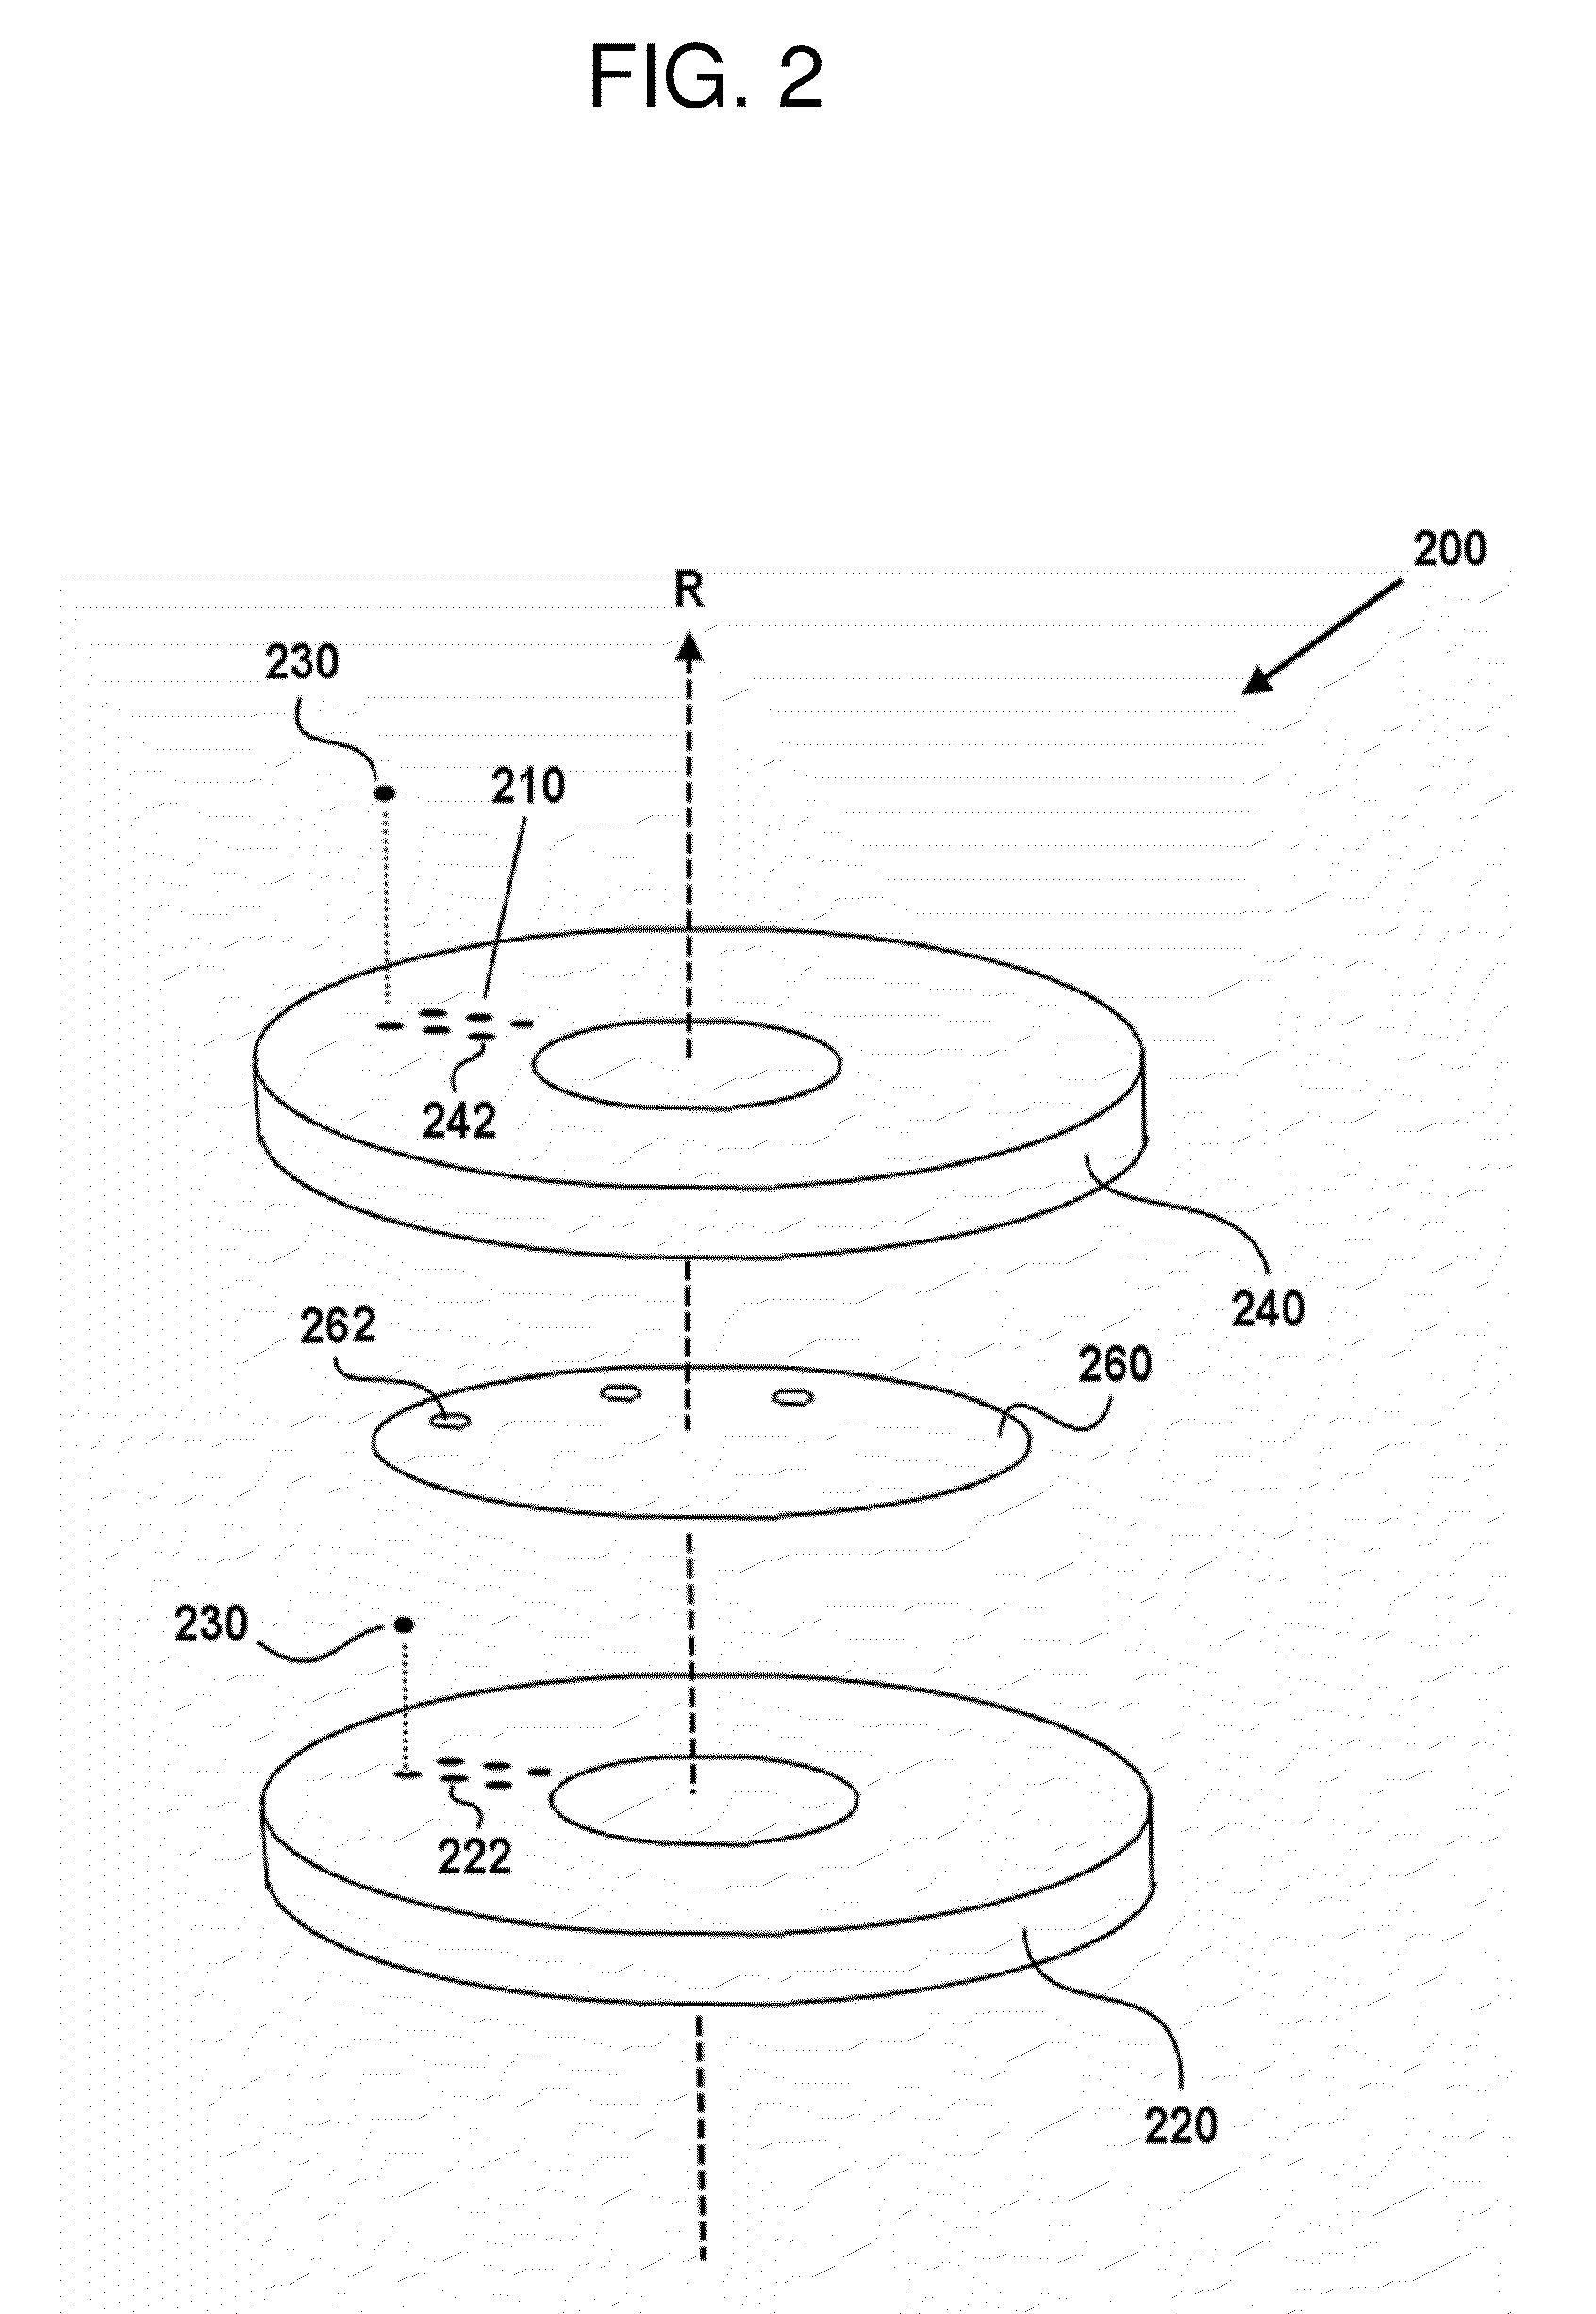 Refreshable braille display device